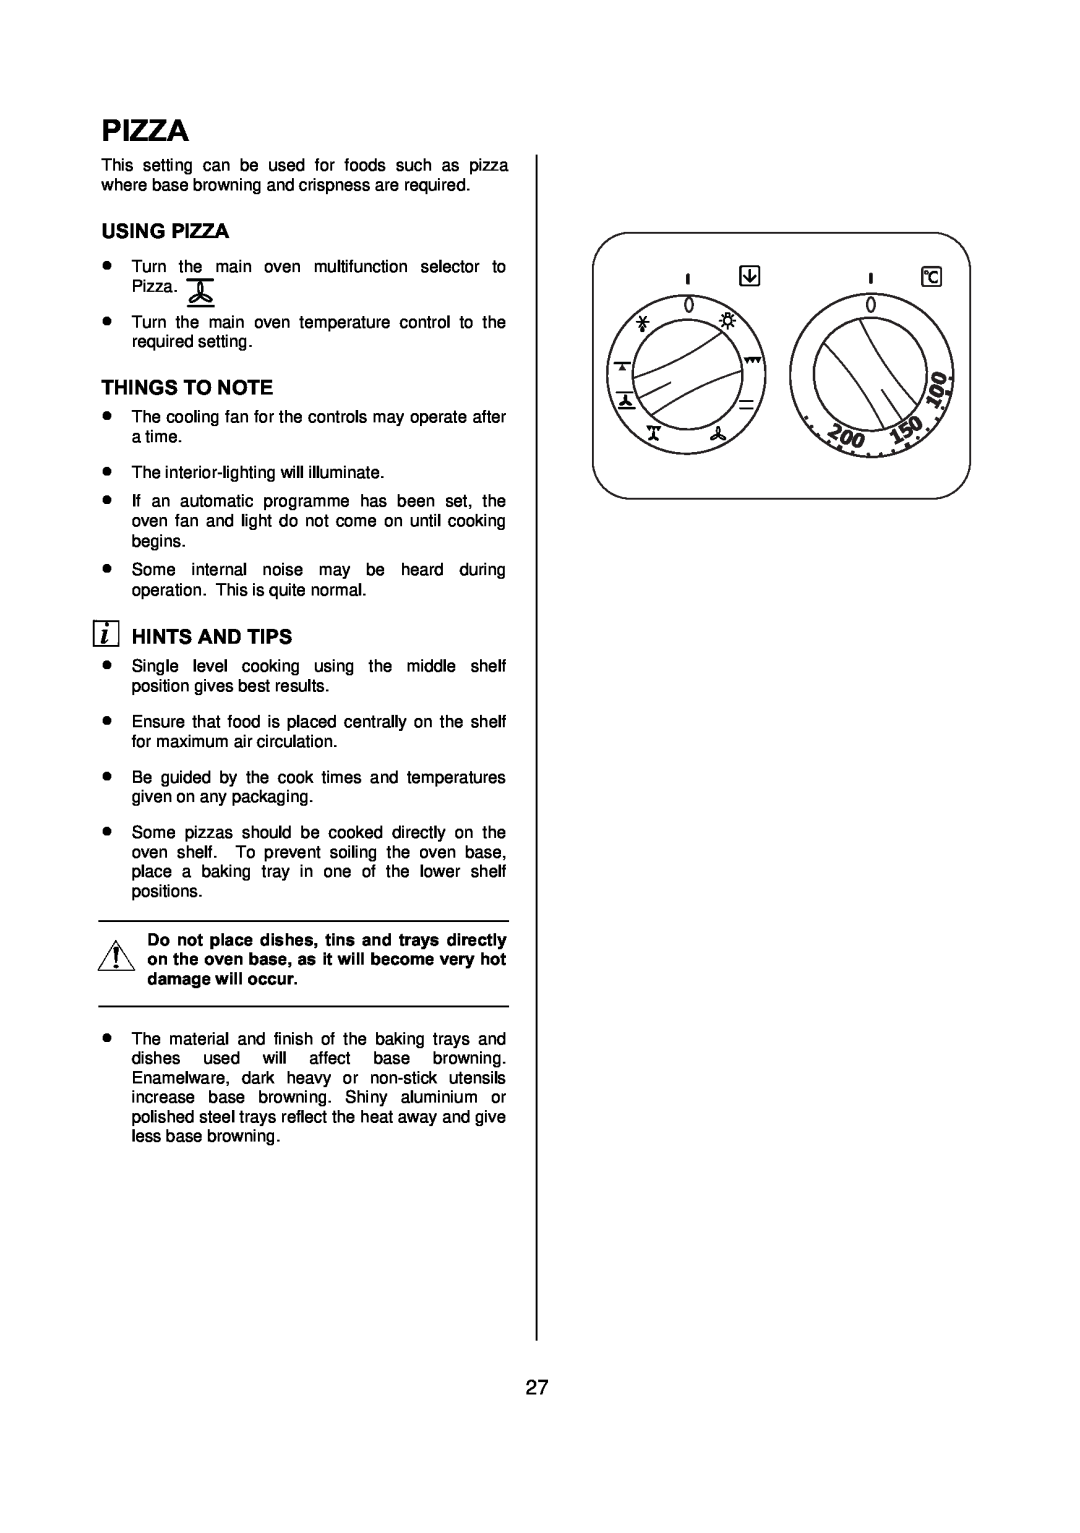 Electrolux D77000 user manual Using Pizza, Things To Note, Hints And Tips 